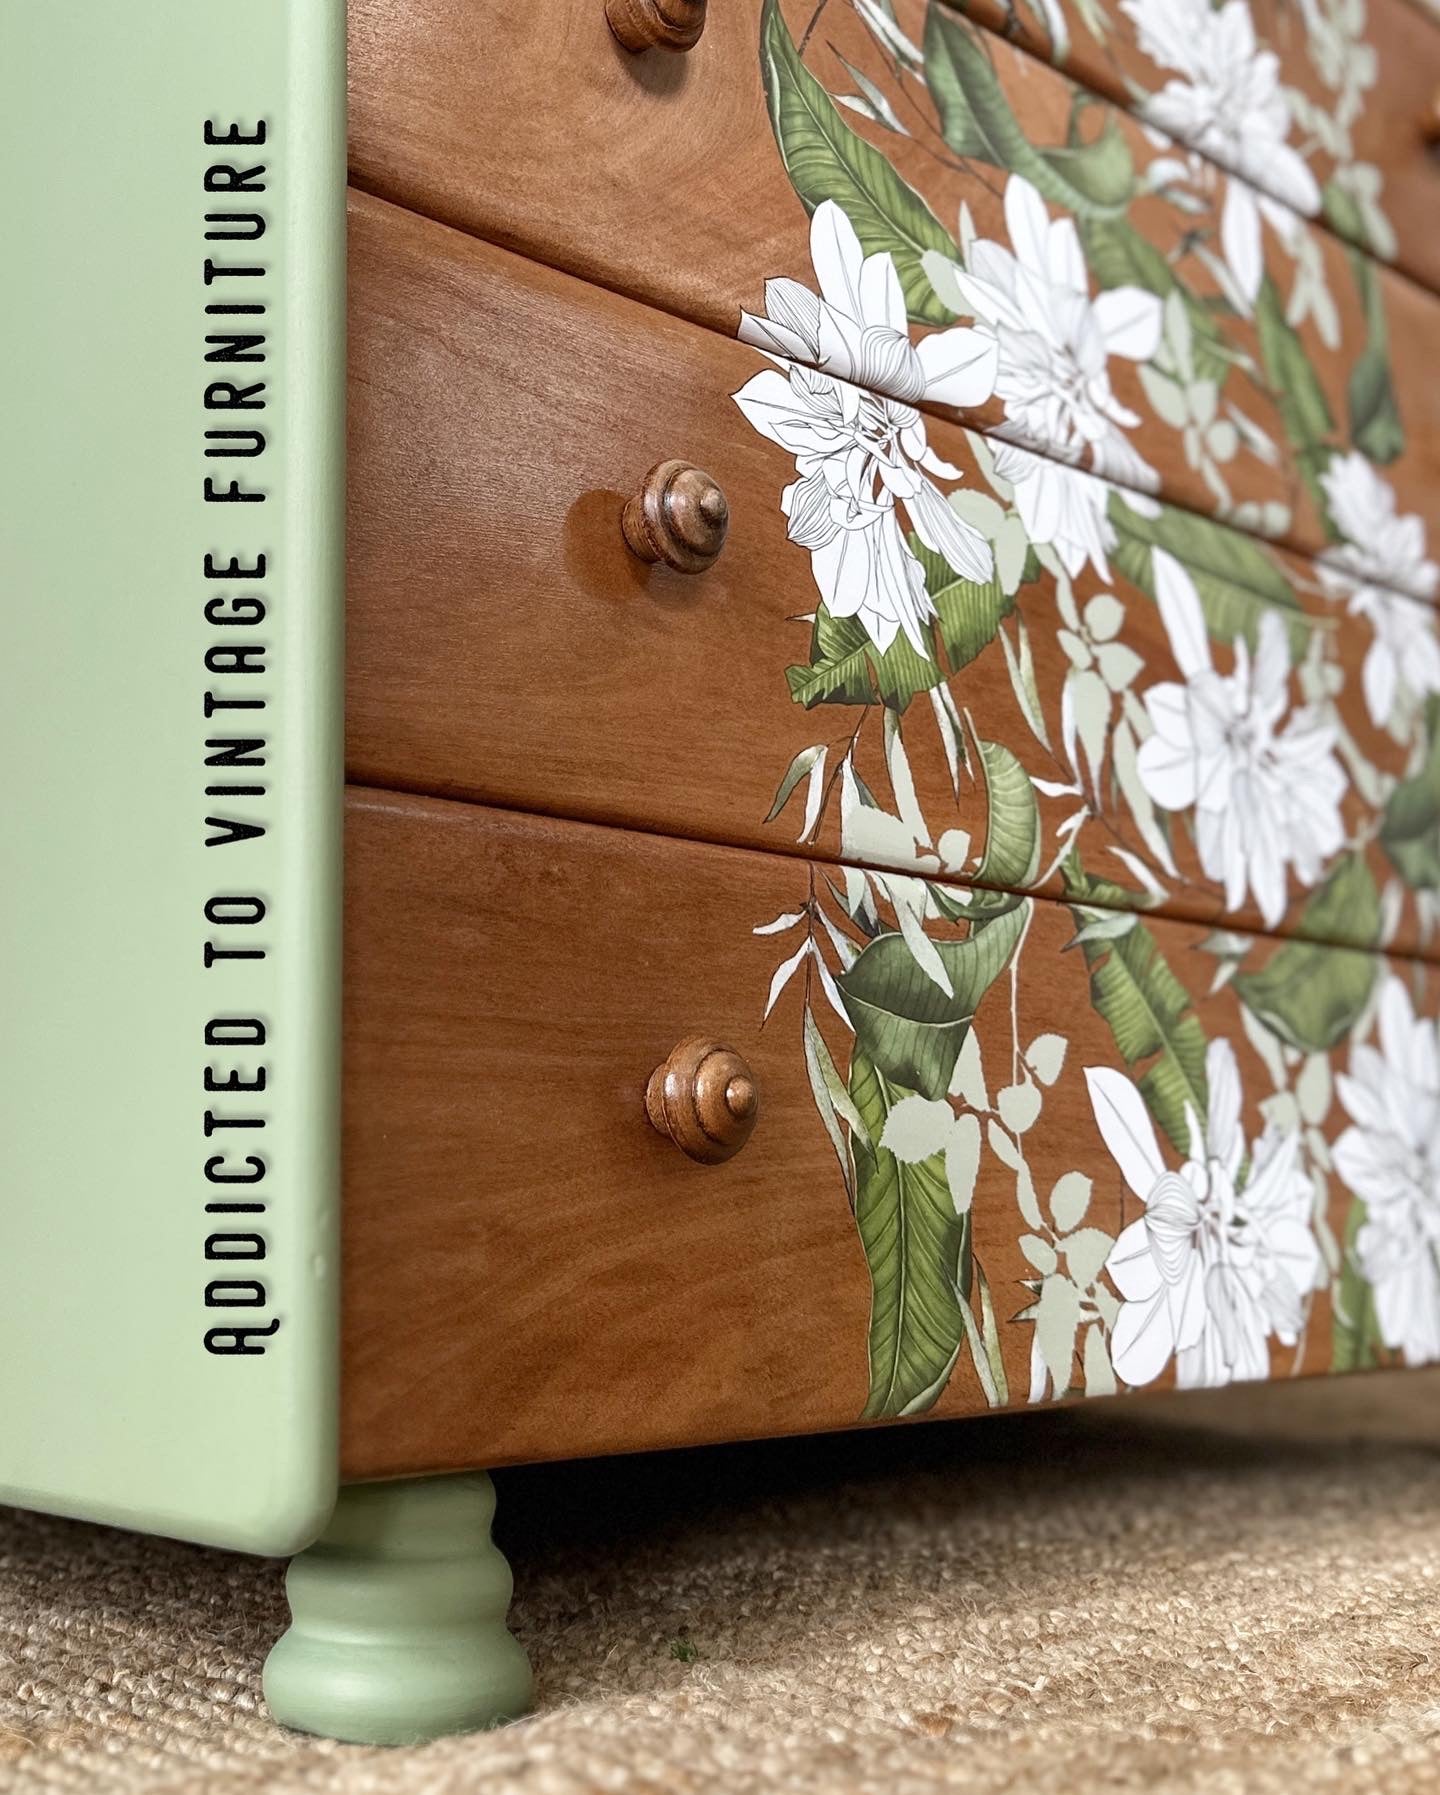 'Peaceful Garden' Vintage Chest of Drawers by ATVF